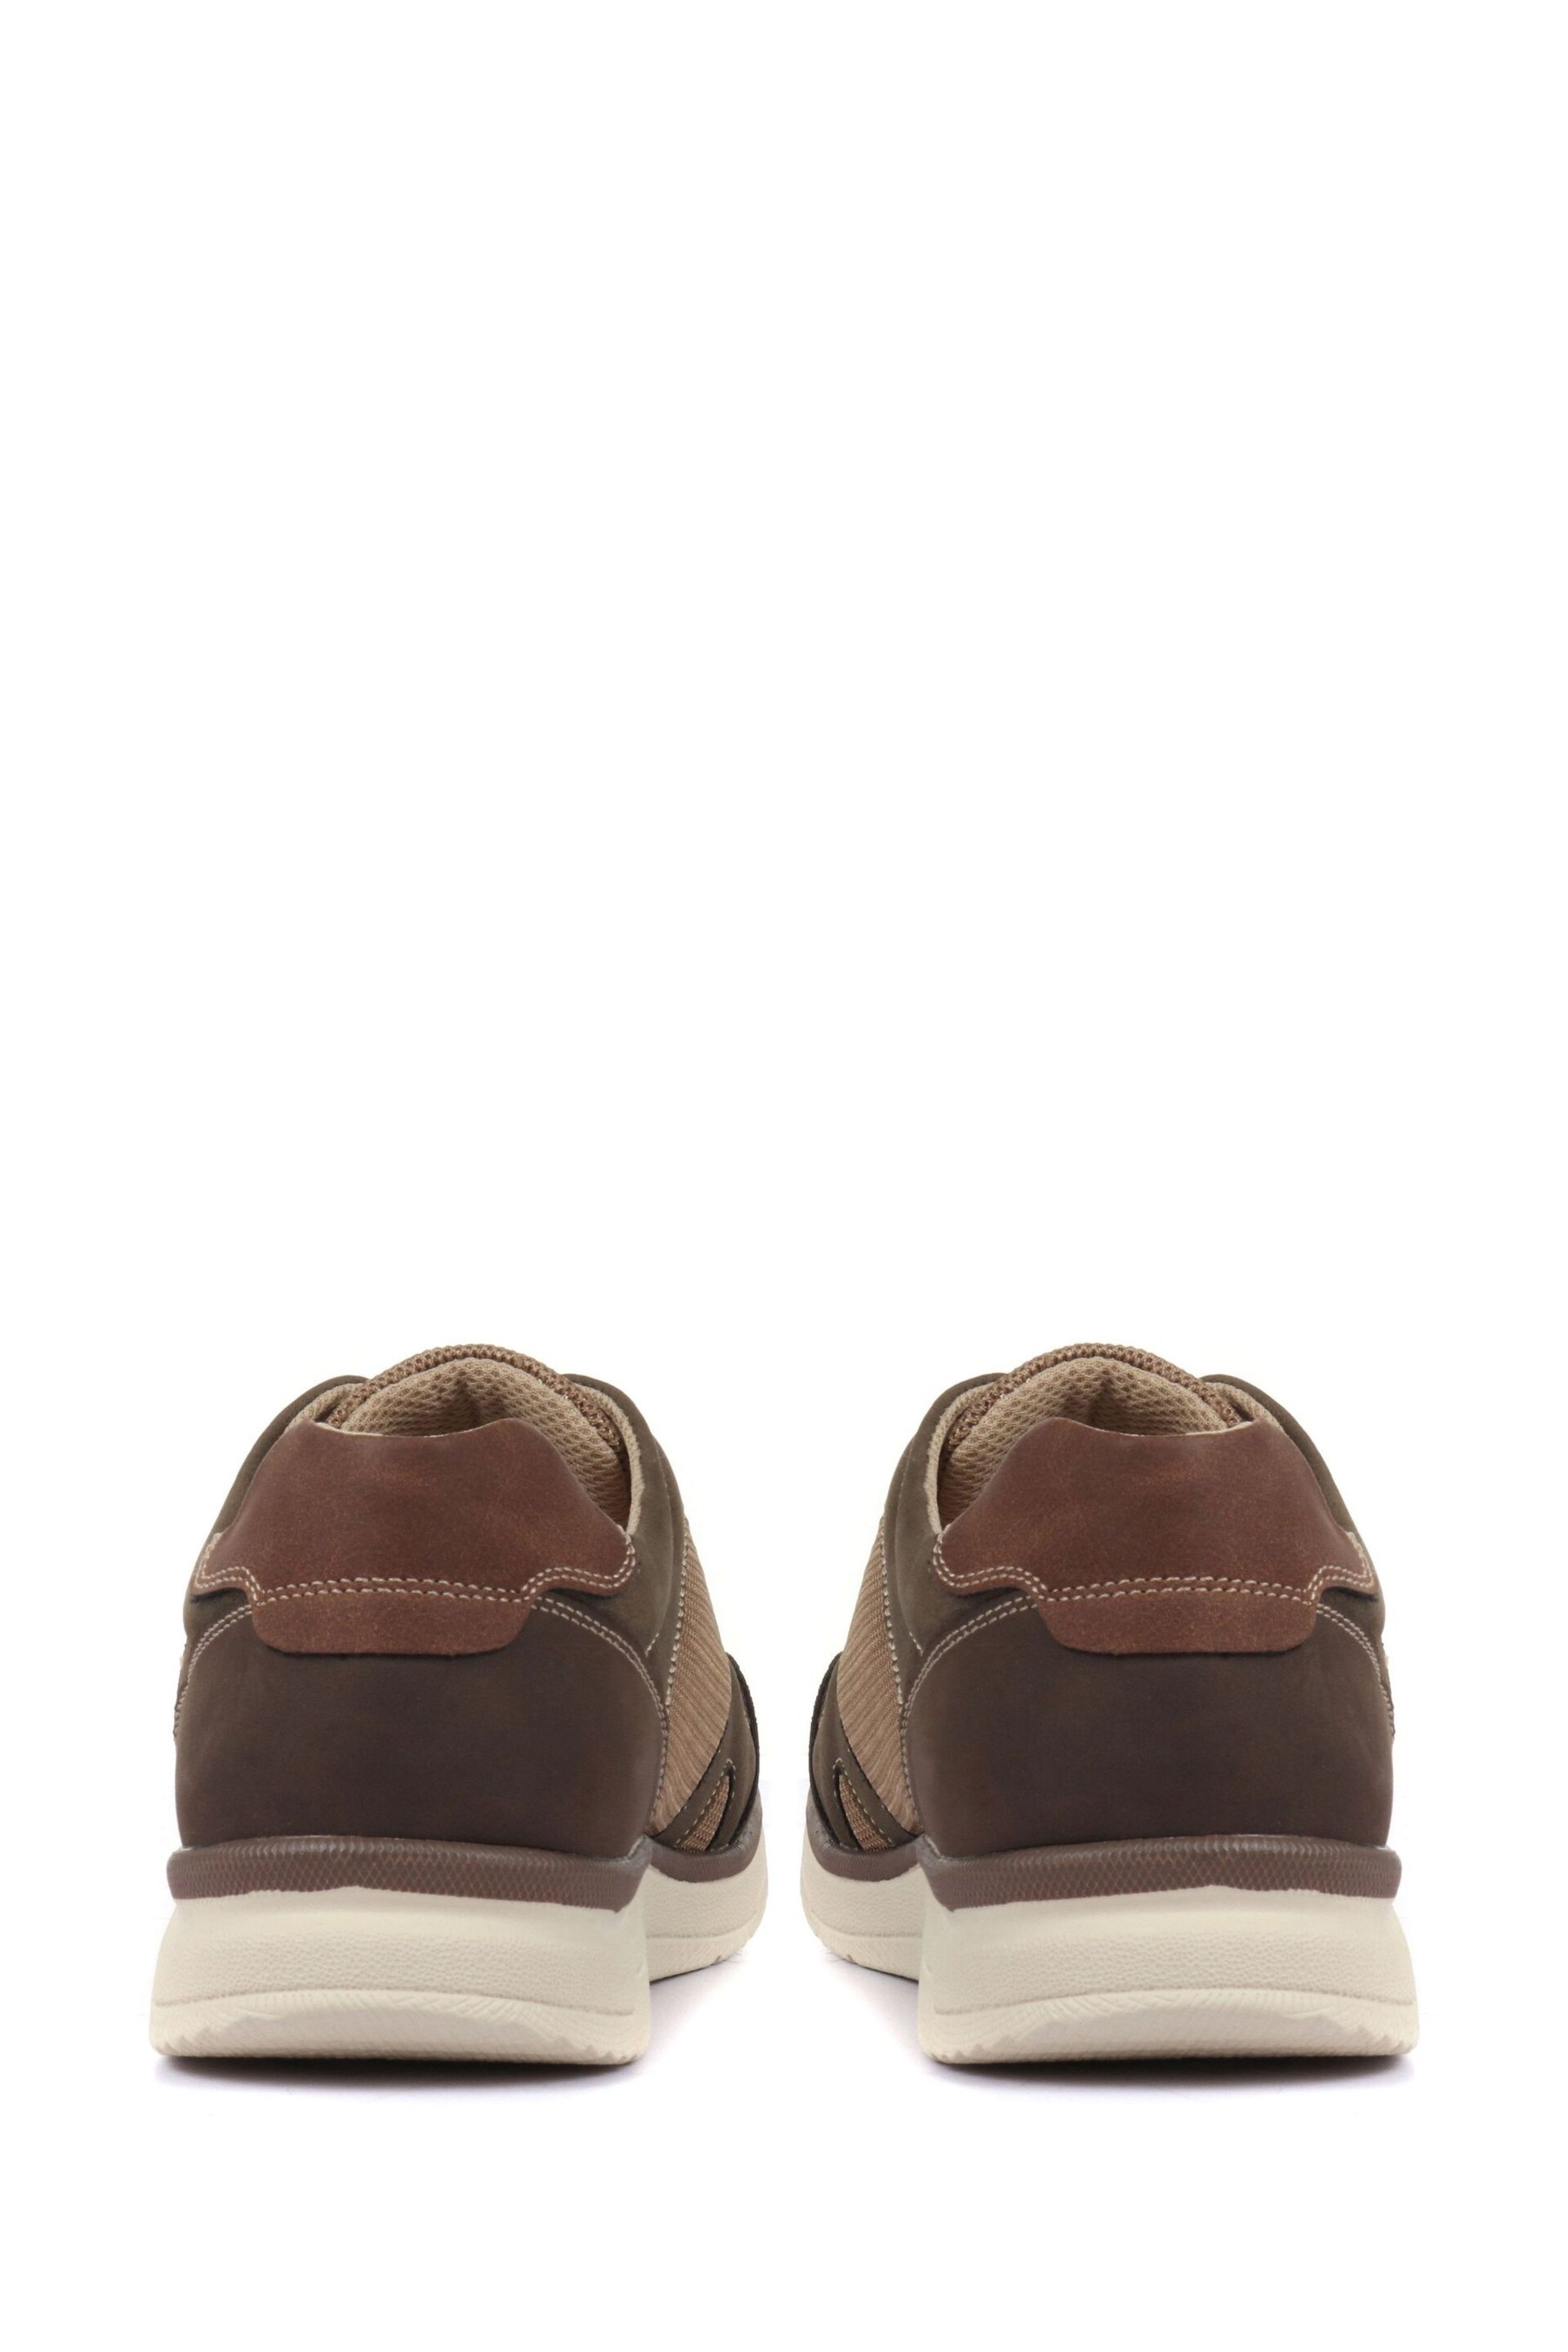 Pavers Brown Mens Wide Fit Trainers - Image 3 of 5